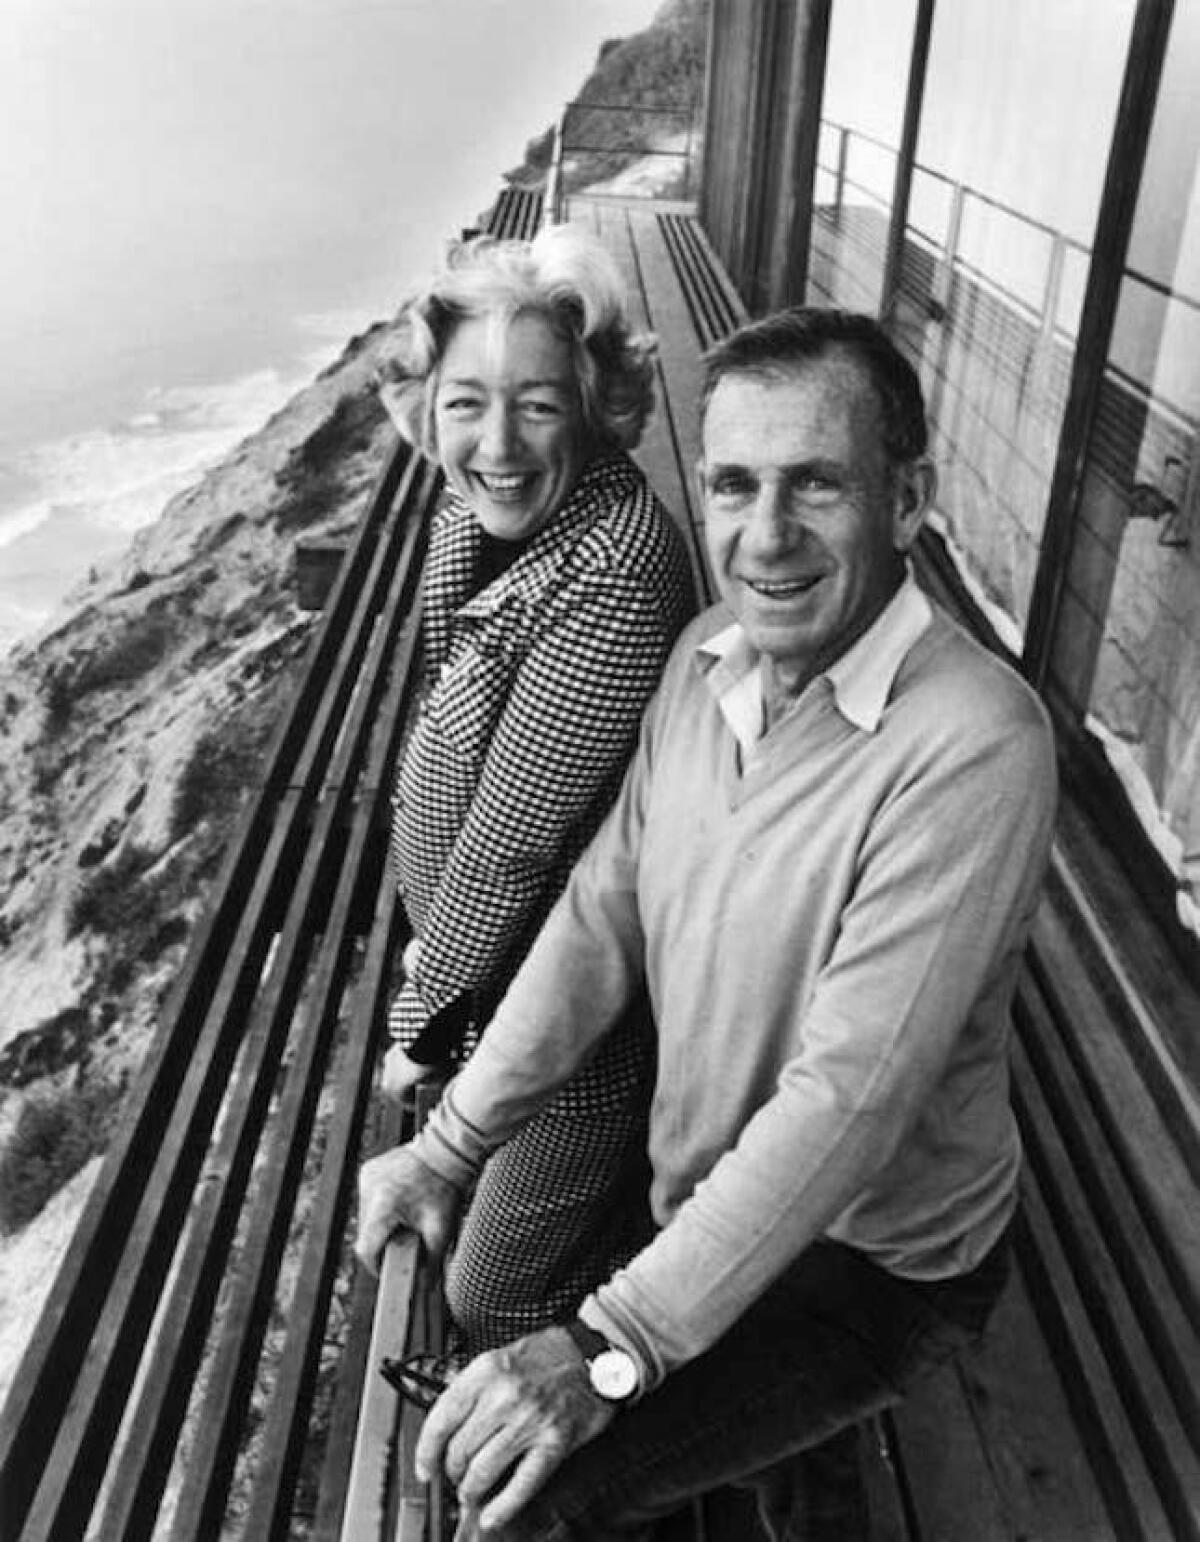 Walter Munk with his late first wife, architect Judith Munk, on the balcony of Institute of Geophysics and Planetary Physics, which they helped create. (1964)